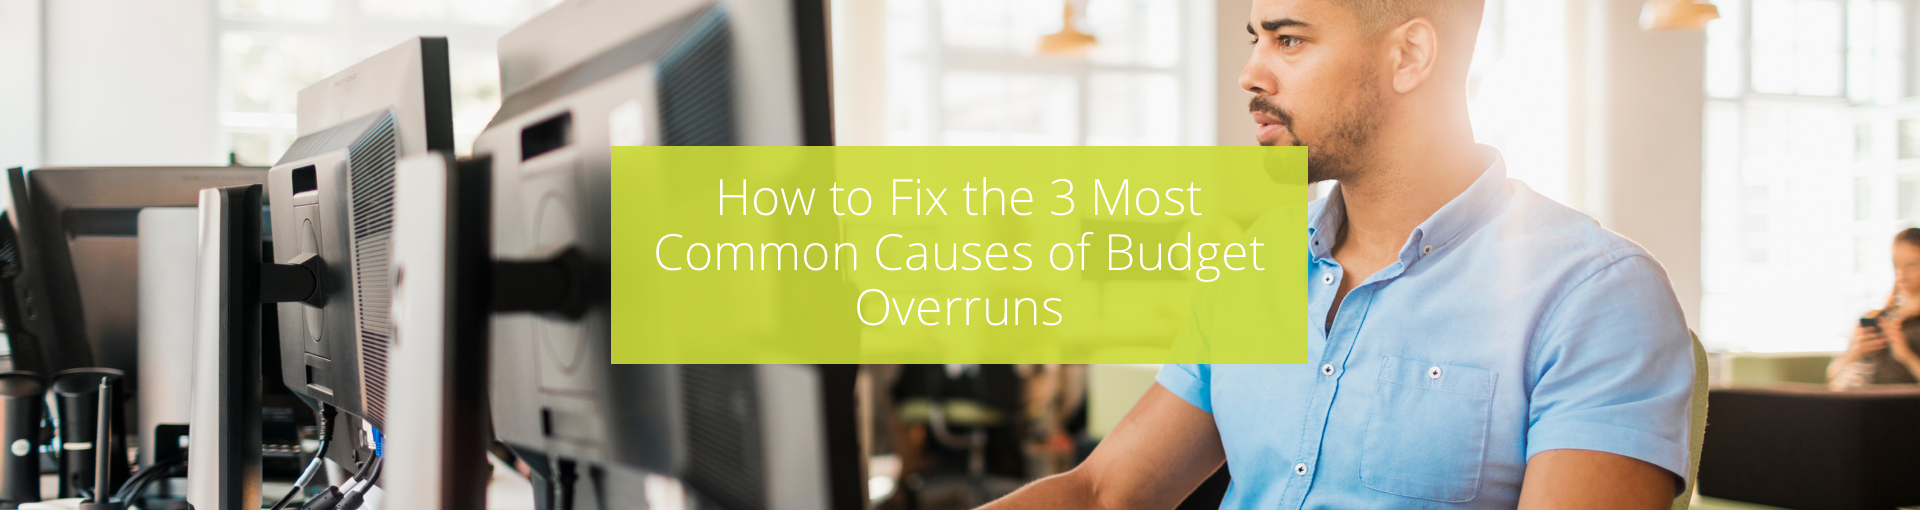 How to Fix the 3 Most Common Causes of Budget Overruns Featured Image